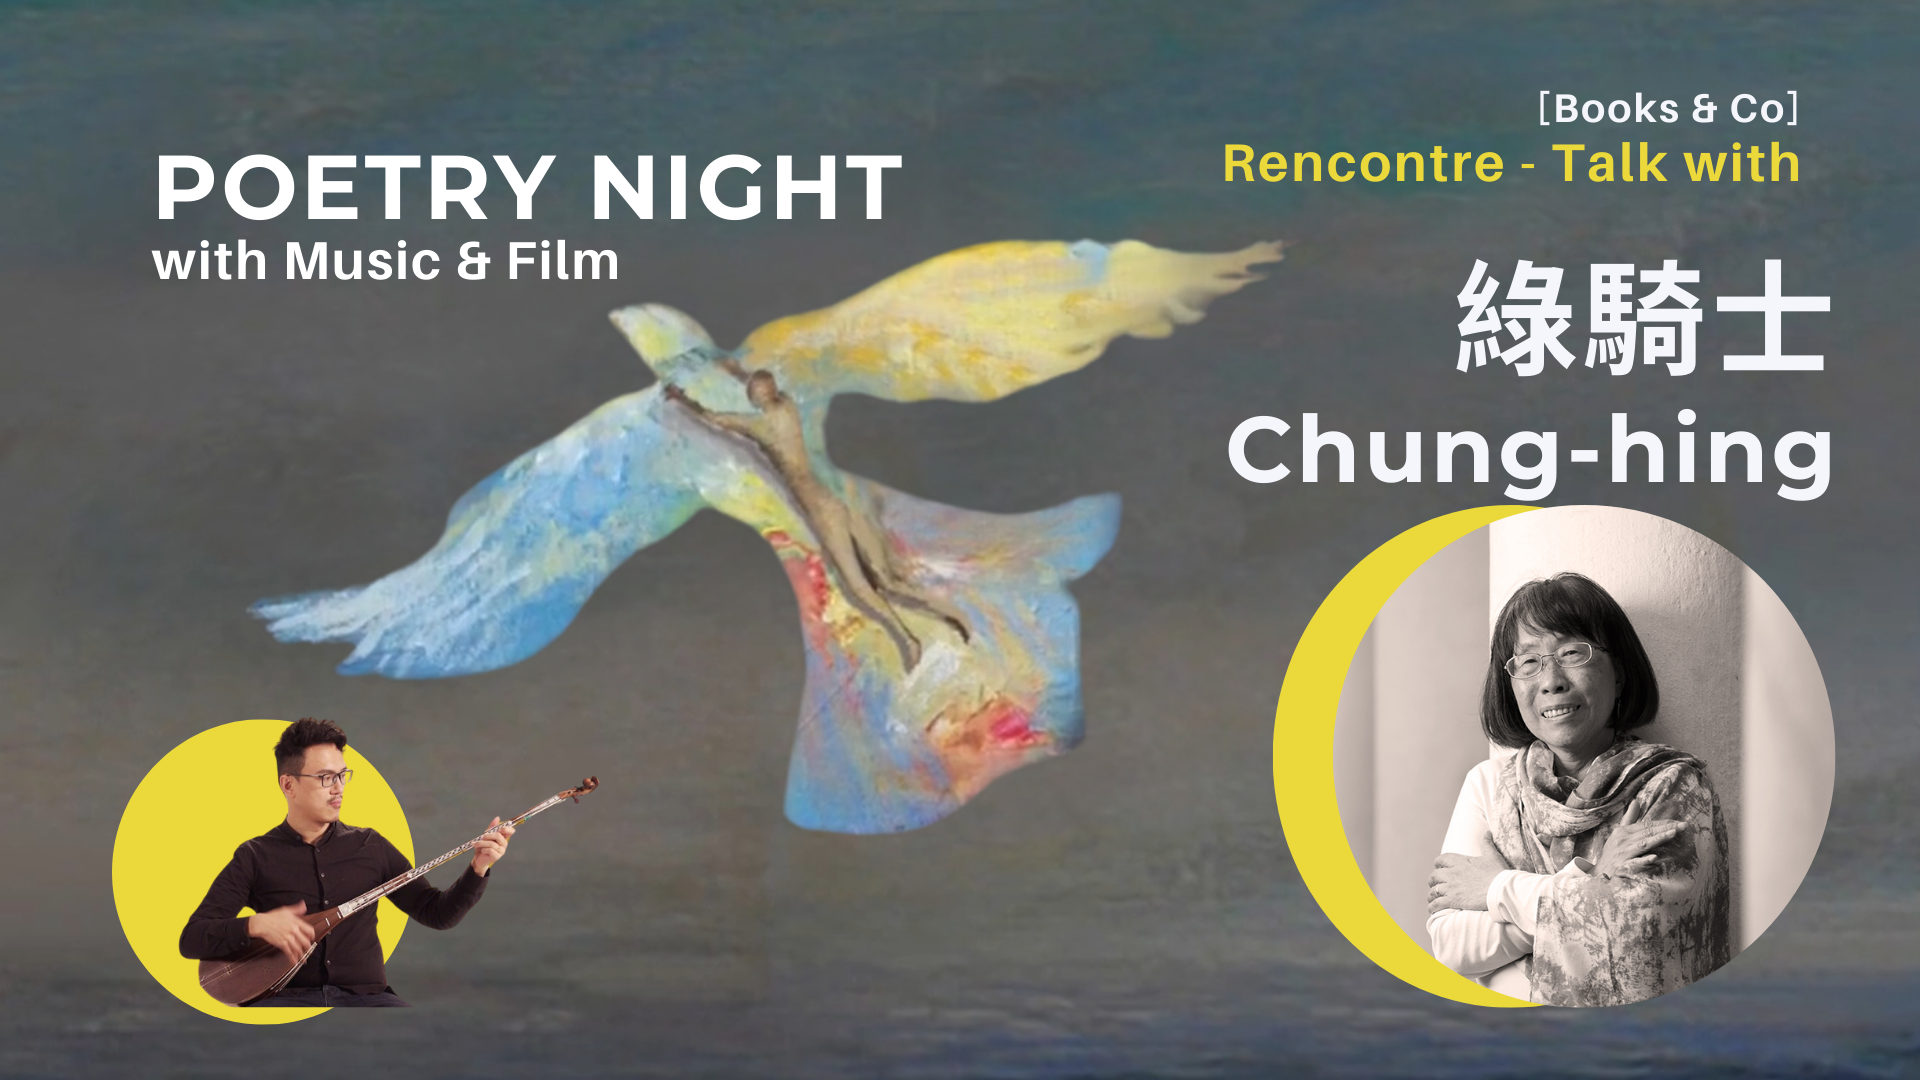 Poetry Night with Chung-hing